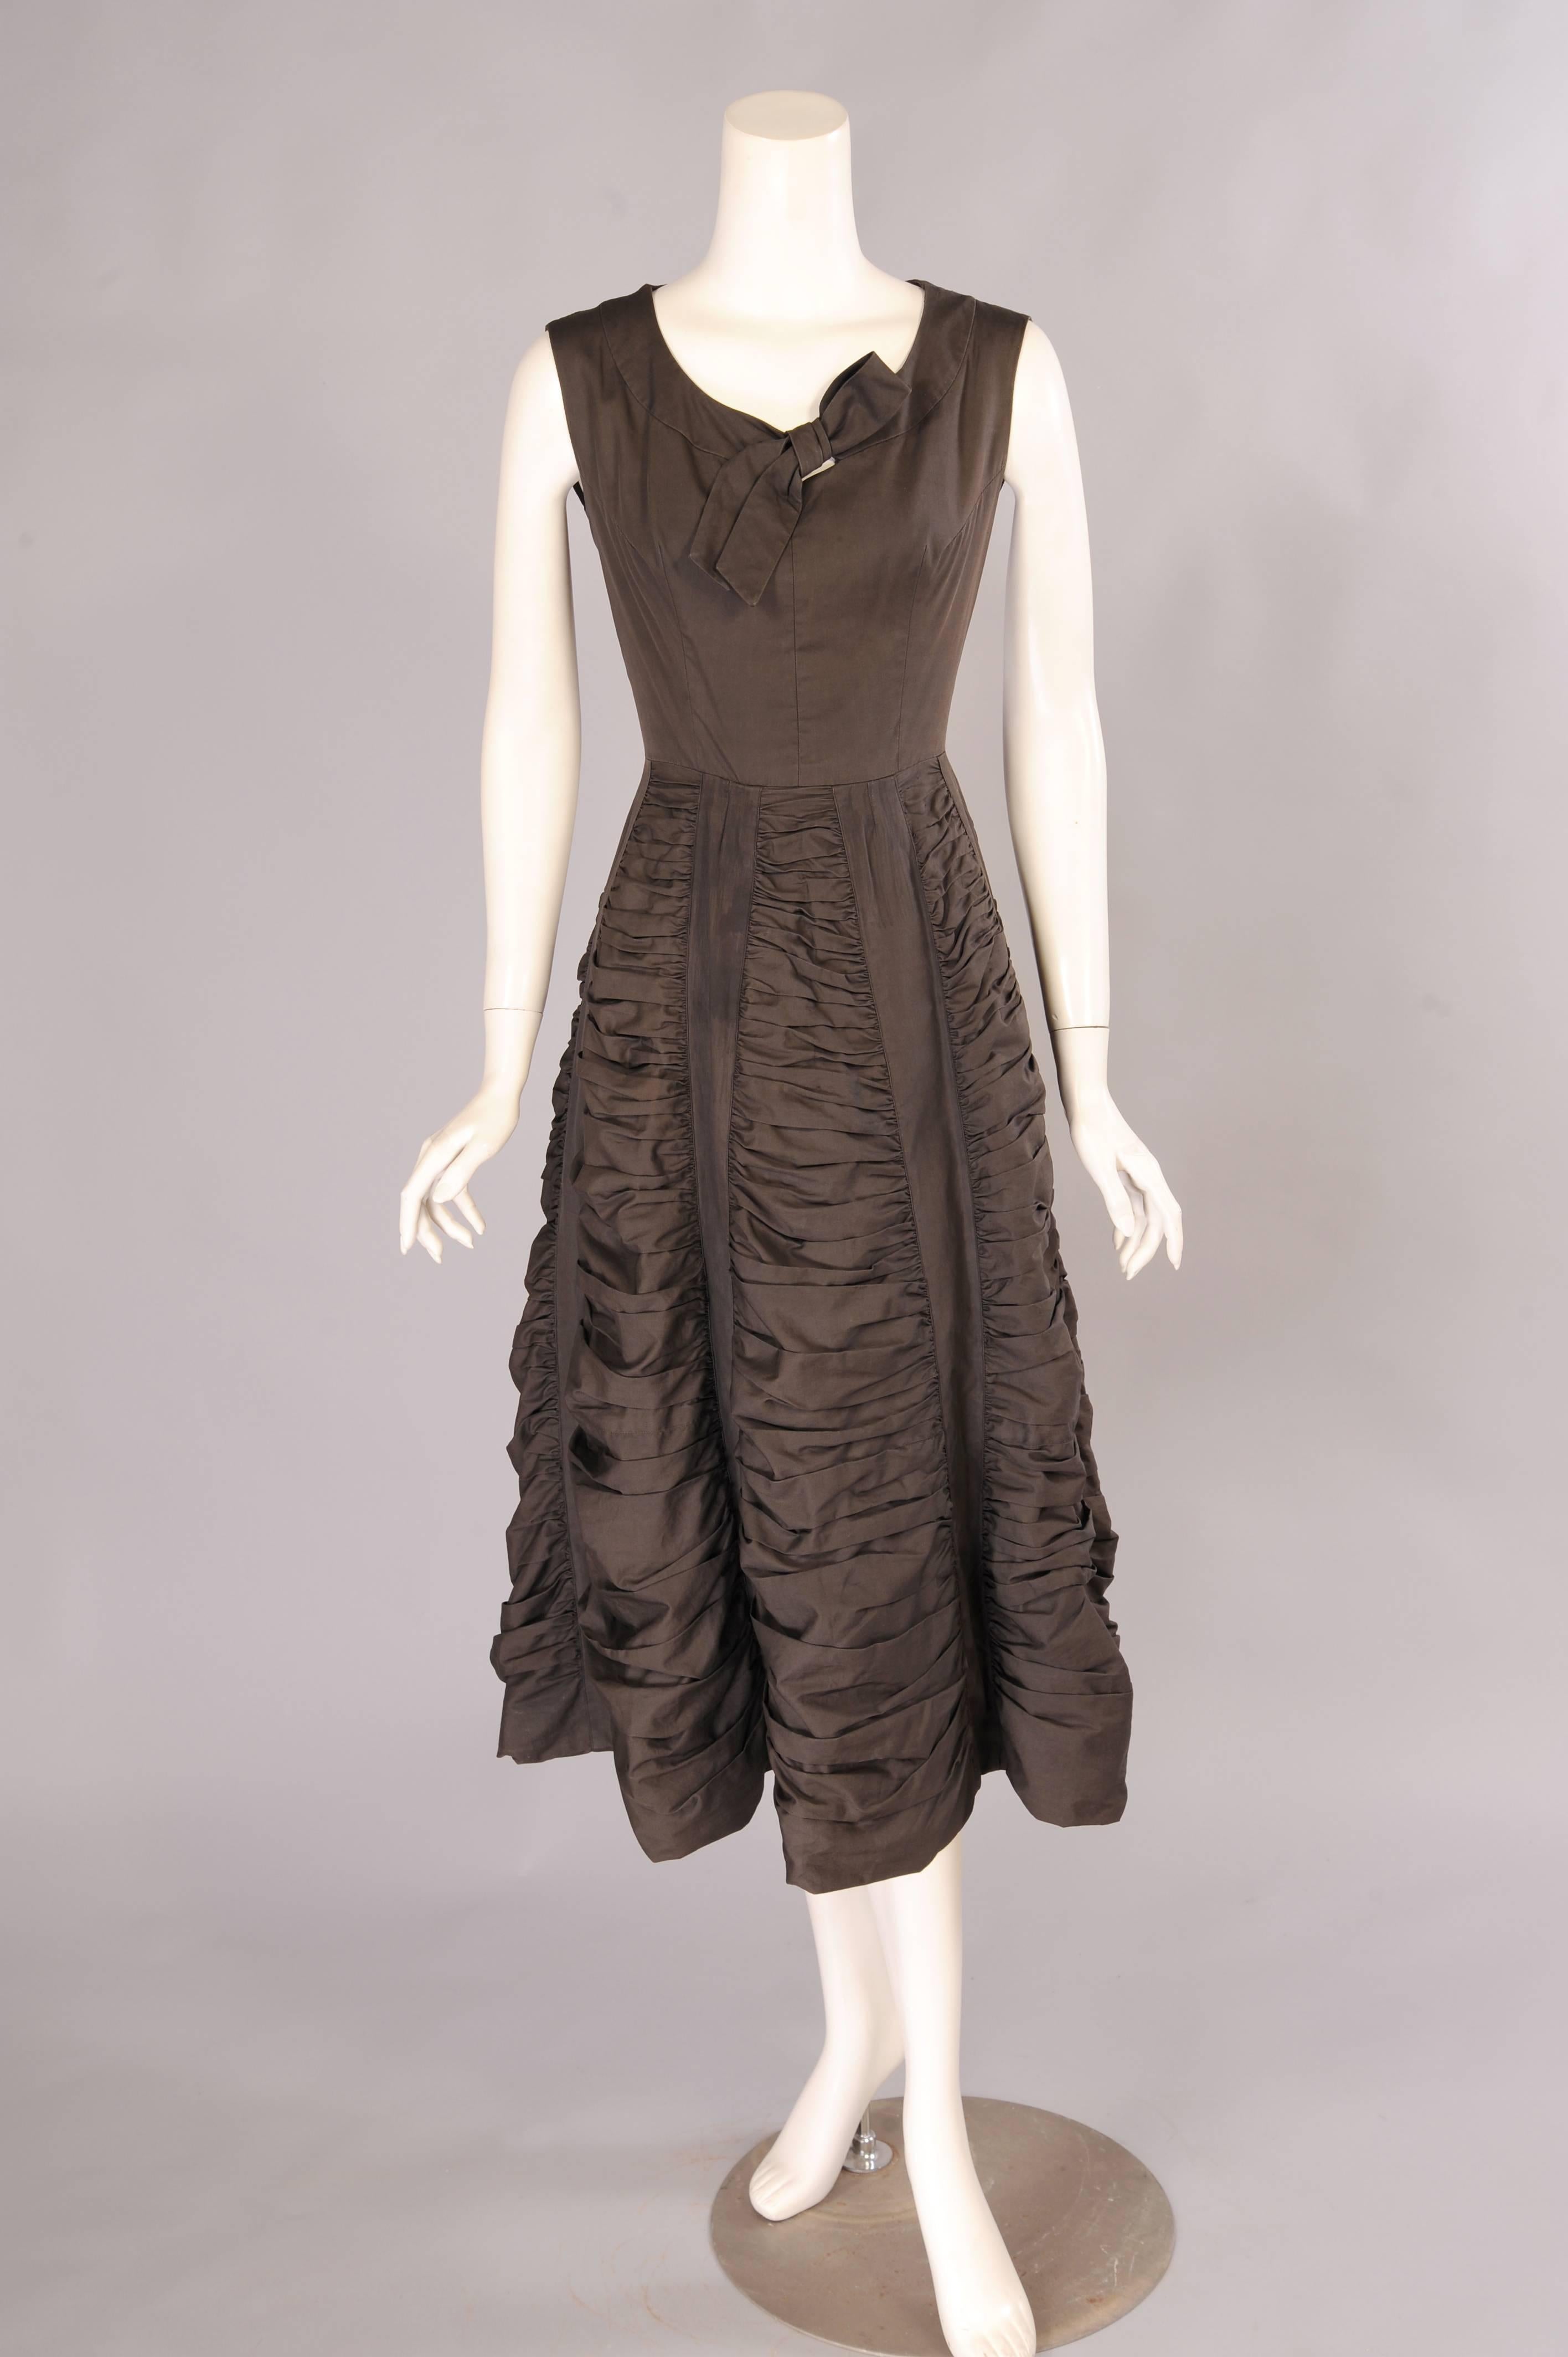 Dark chocolate brown cotton sets this 1950's cocktail dress apart from the LBD. It has a faux tie neckline, fitted bodice and a full skirt. The skirt is gathered horizontally for added interest and fullness. The gathers are held in place by flat